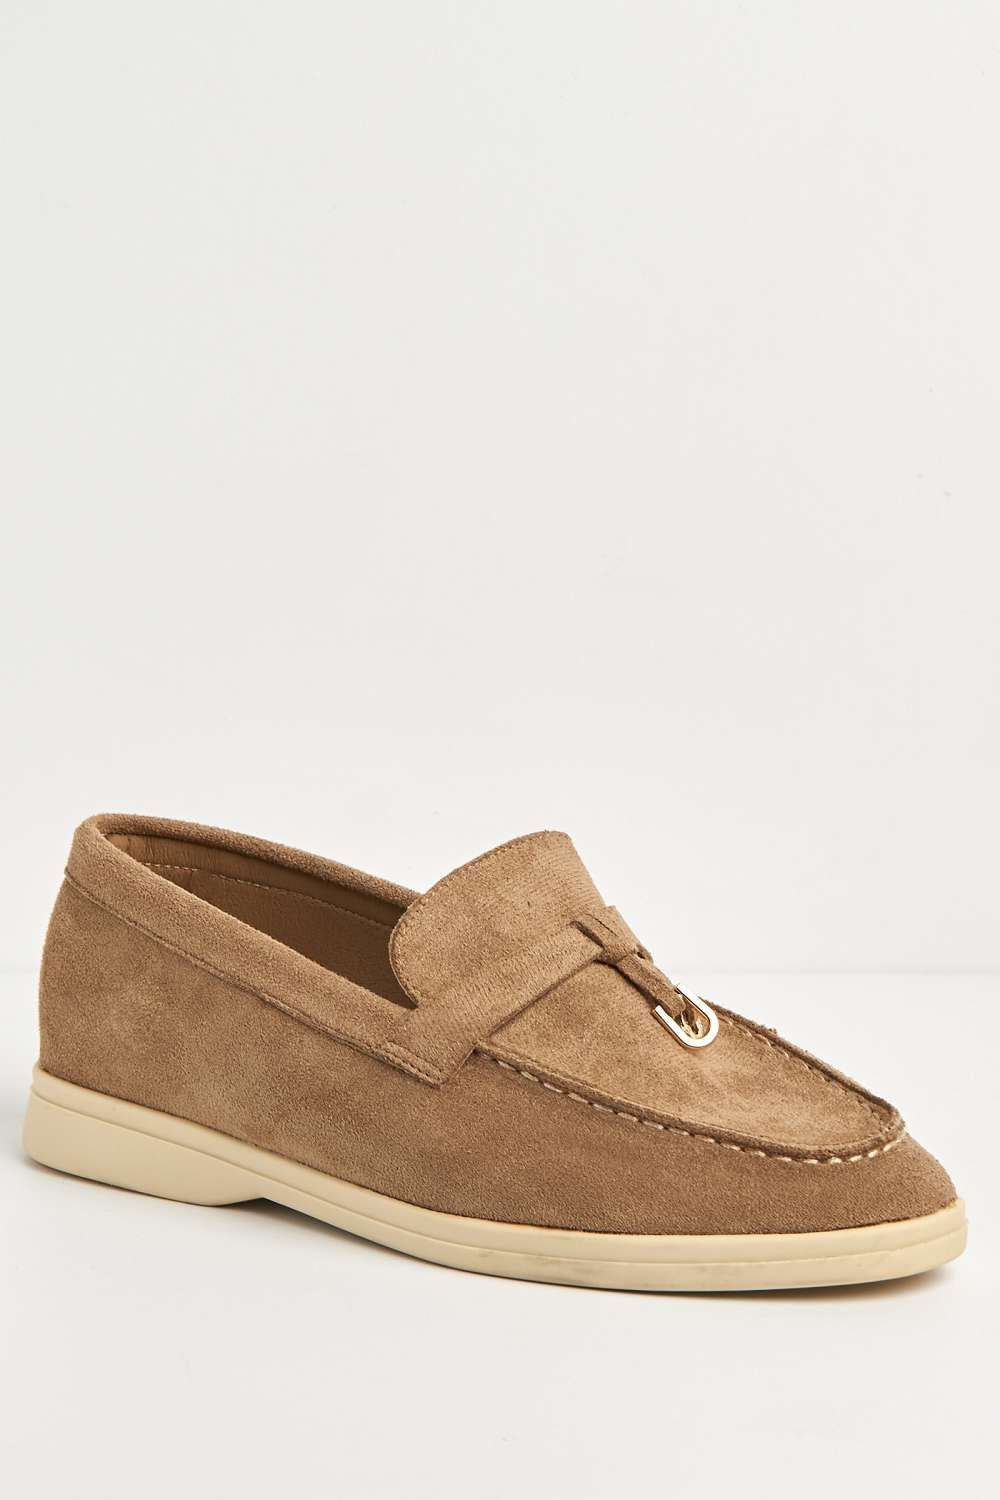 Miss Diva Tonya Charm Detail Slip-On Faux Suede Loafers in Taupe